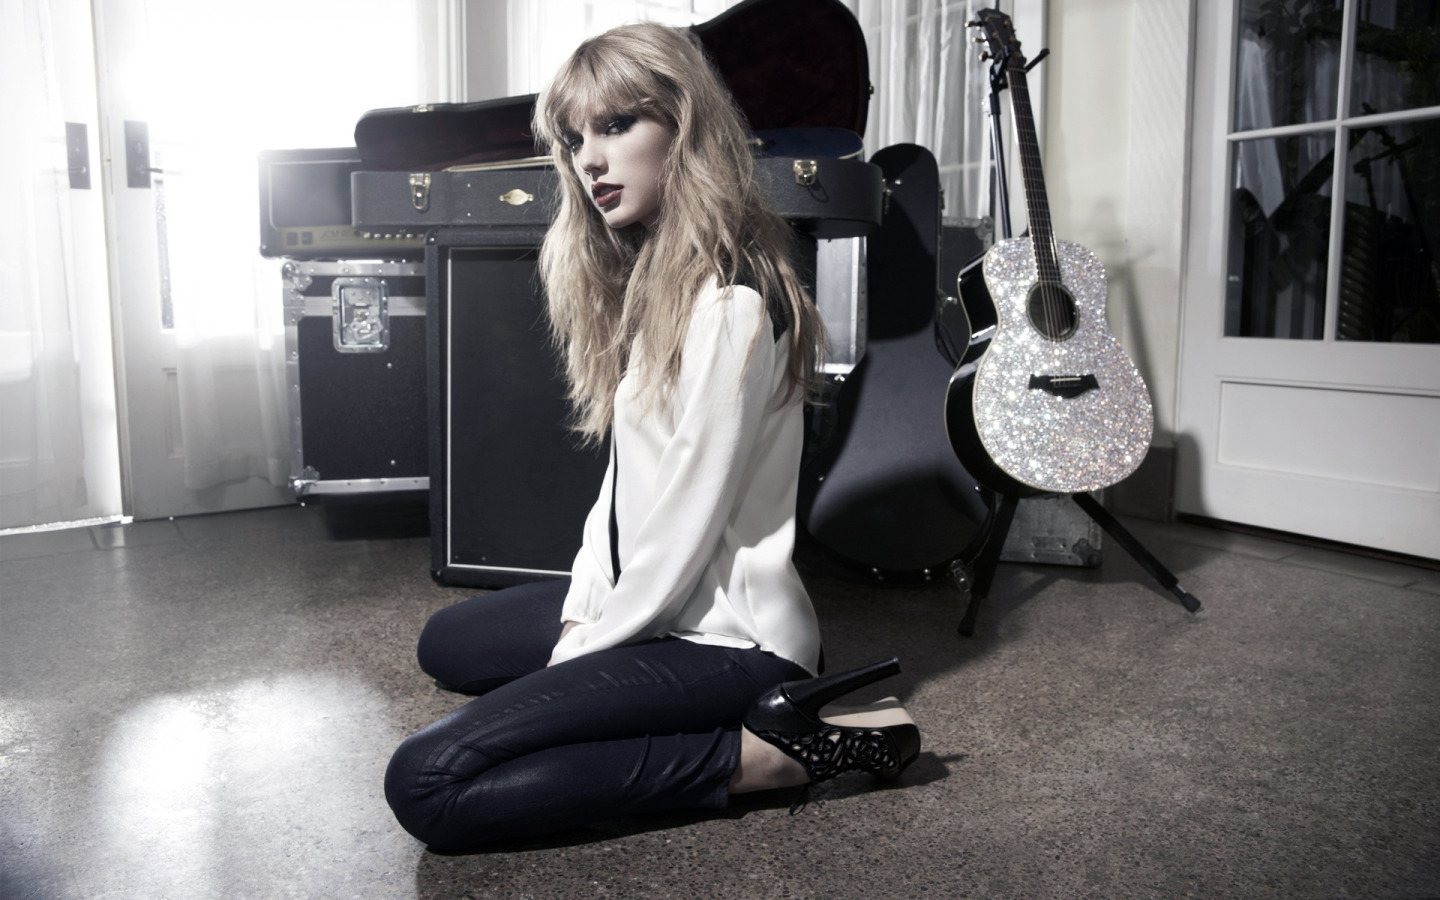 Taylor pictures. Тейлор Свифт. Певица Тейлор Свифт. Тейлор Свифт фотосессии. Тейлор Свифт 2021.